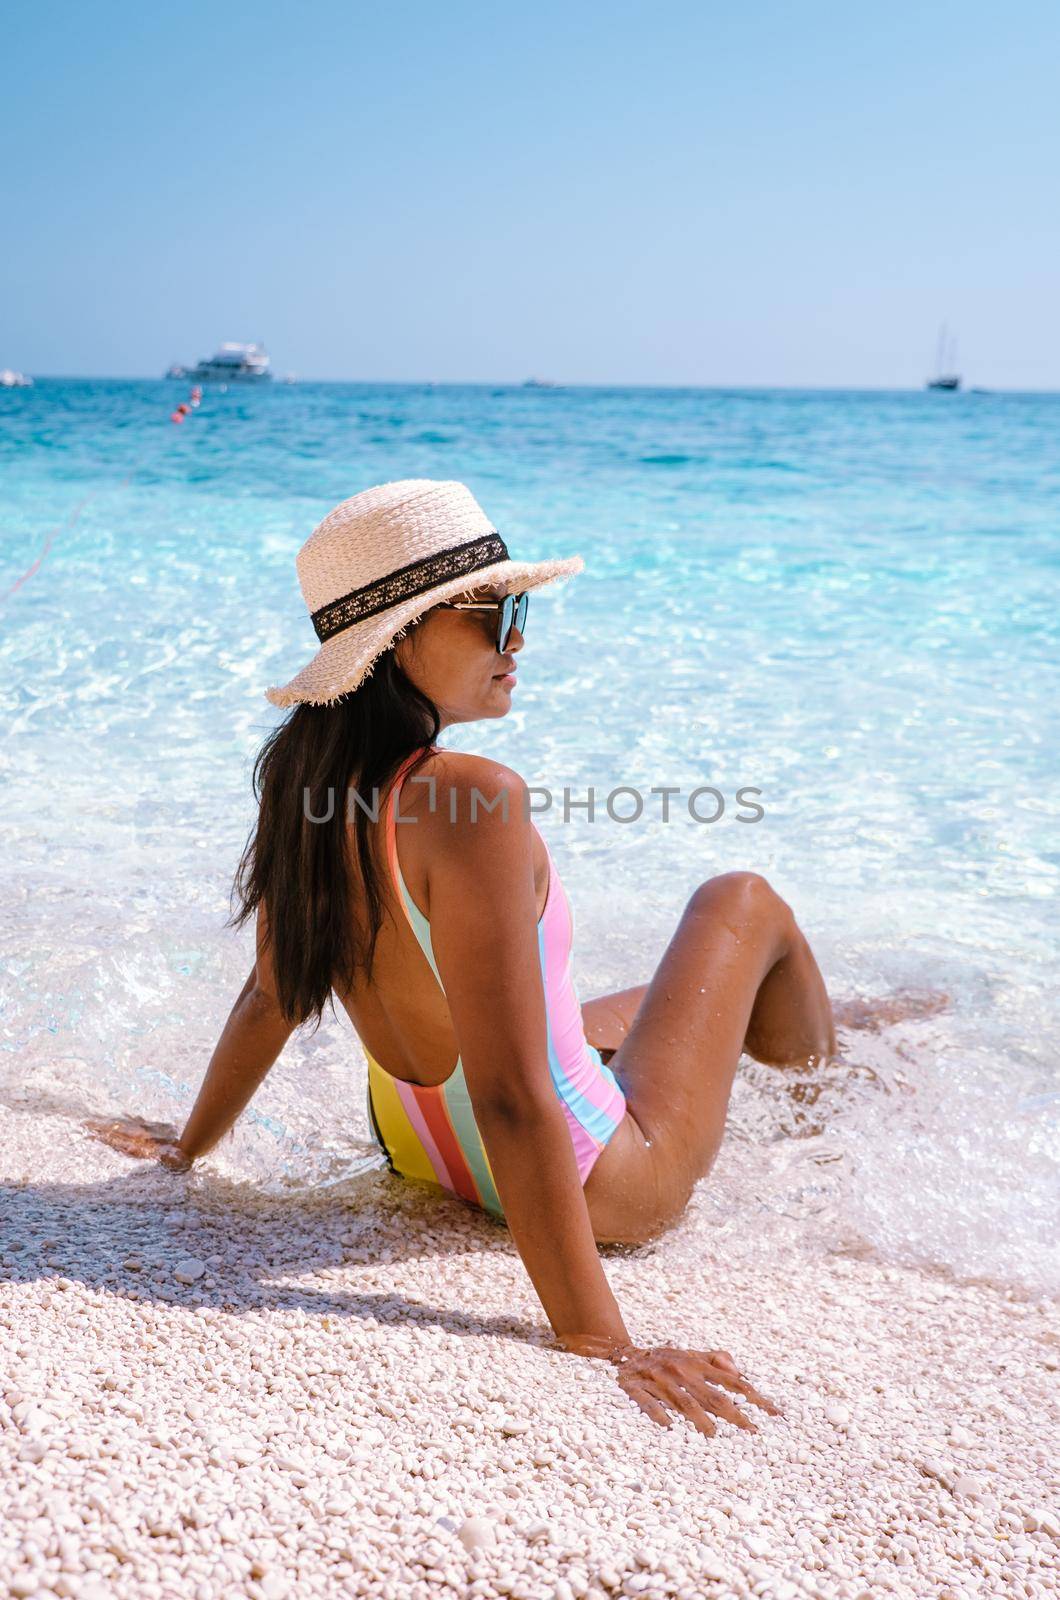 Golfo di Orosei Sardina, Asian women on the beach Sardinia Italy, a young girl on vacation Sardinia Italy, woman playing in the ocean with crystal clear blue water,